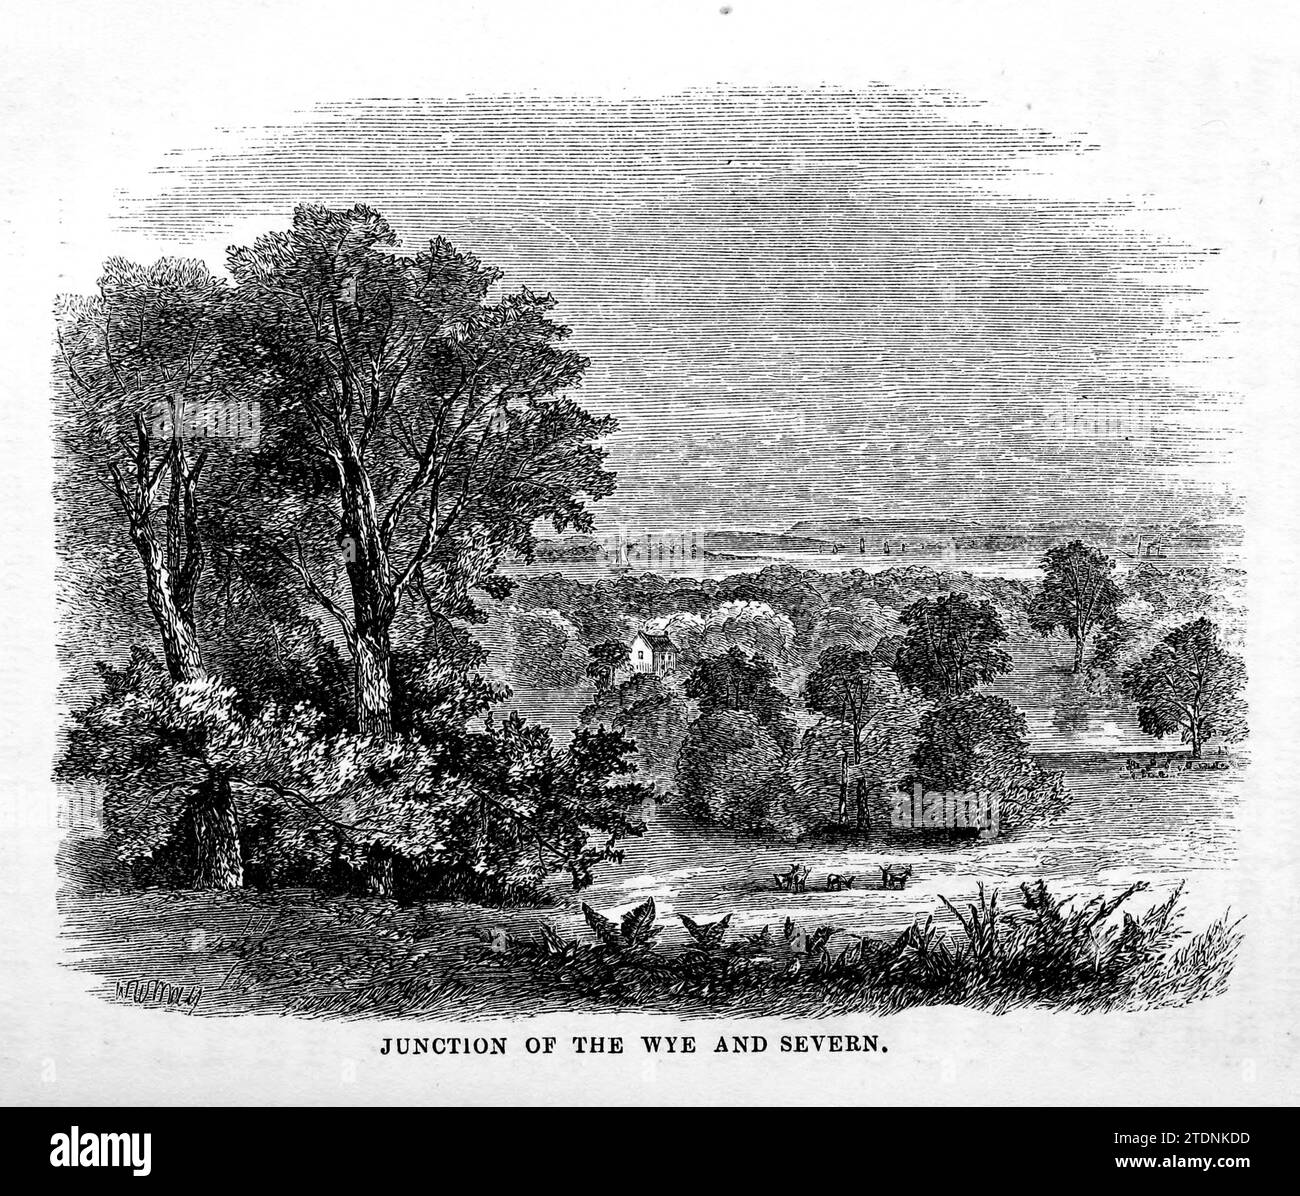 Junction of the Wye and Severn from the book The Severn valley: a series of sketches, descriptive and pictorial, of the course of the Severn: containing notices of its topographical, industrial, and geological features; with glances at its historical and legendary associations by Randall, John, 1810-1910 Publication date 1862 Publisher J. S. Virtue Stock Photo